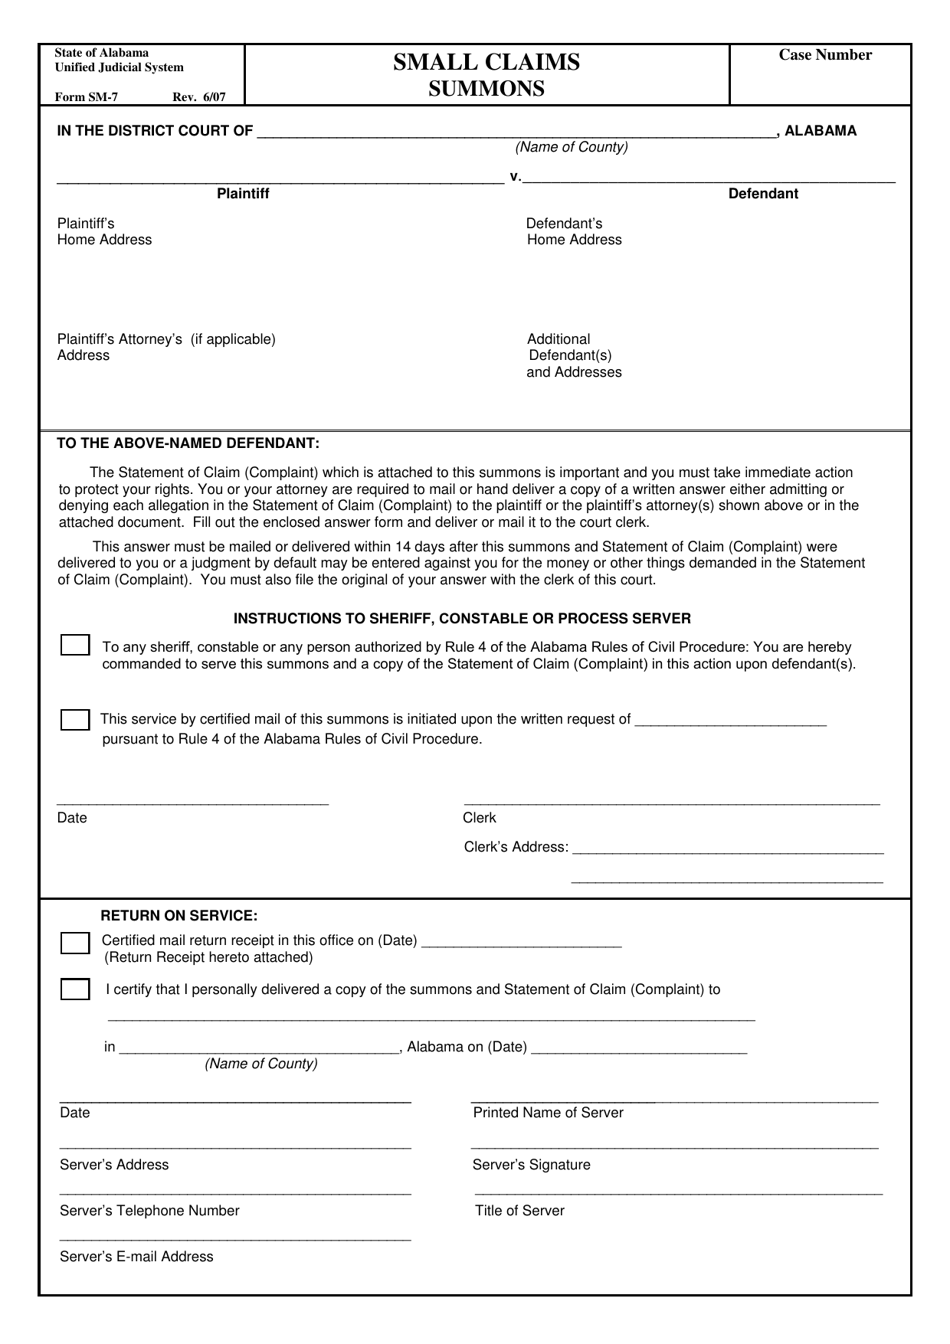 Form SM-07 Small Claims - Summons - Alabama, Page 1